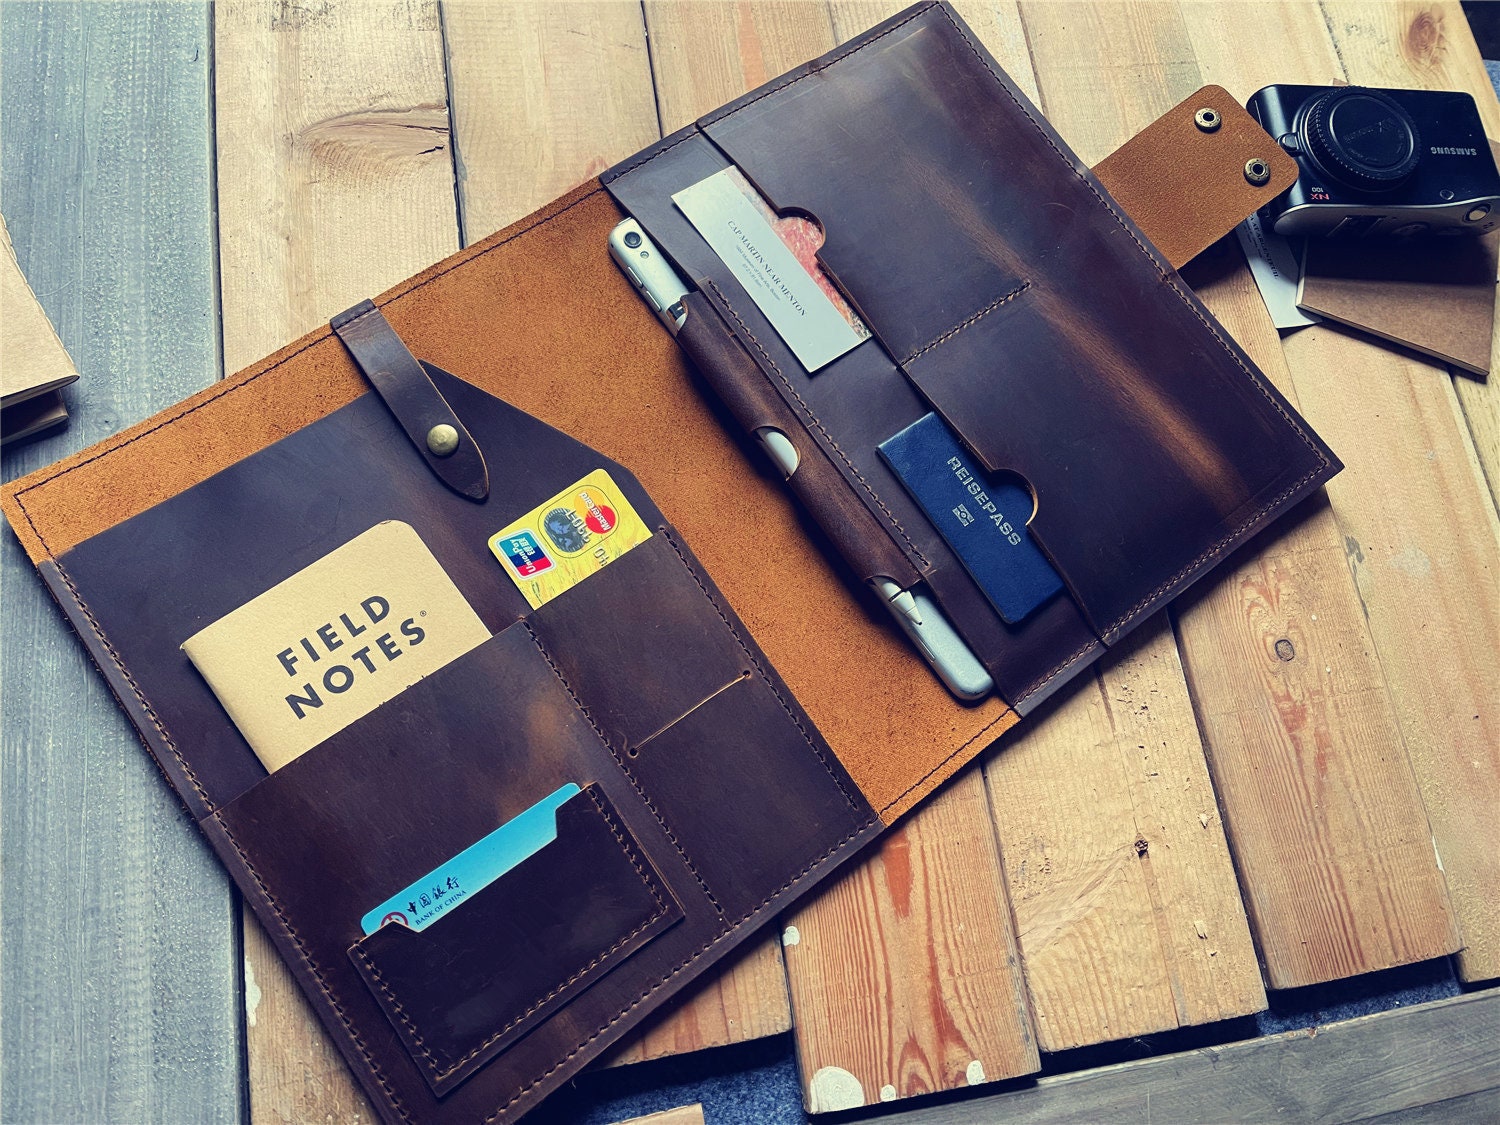 Customized Leather iPad Cases / Sleeves / Covers - LeatherNeo